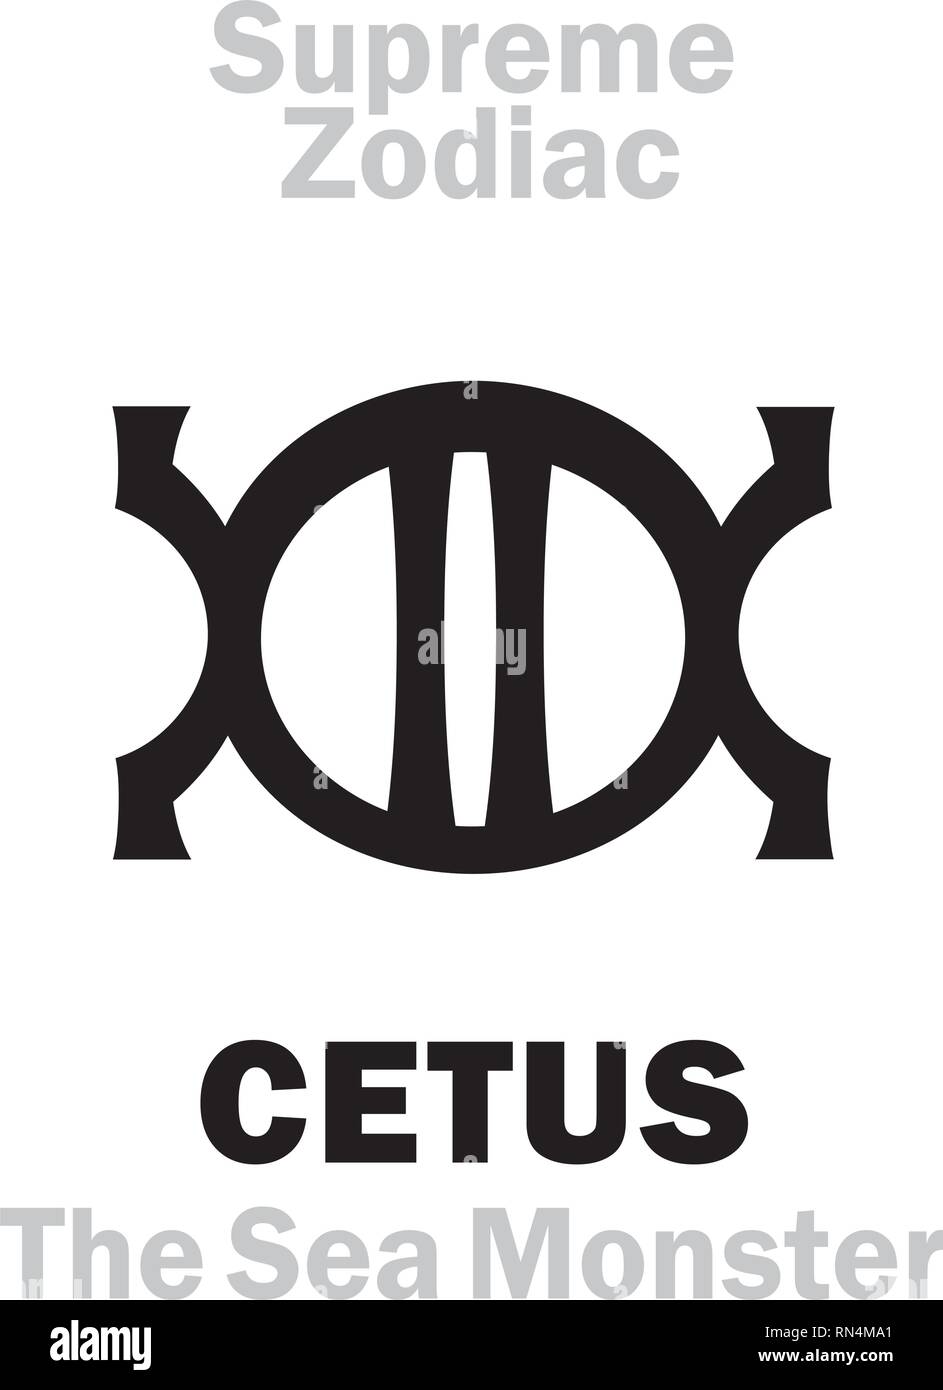 Astrology Alphabet: CETUS (The Sea Monster), constellation Cetus («The Chaos»). Sign of Supreme Zodiac (External circle). Hieroglyphic character sign. Stock Vector